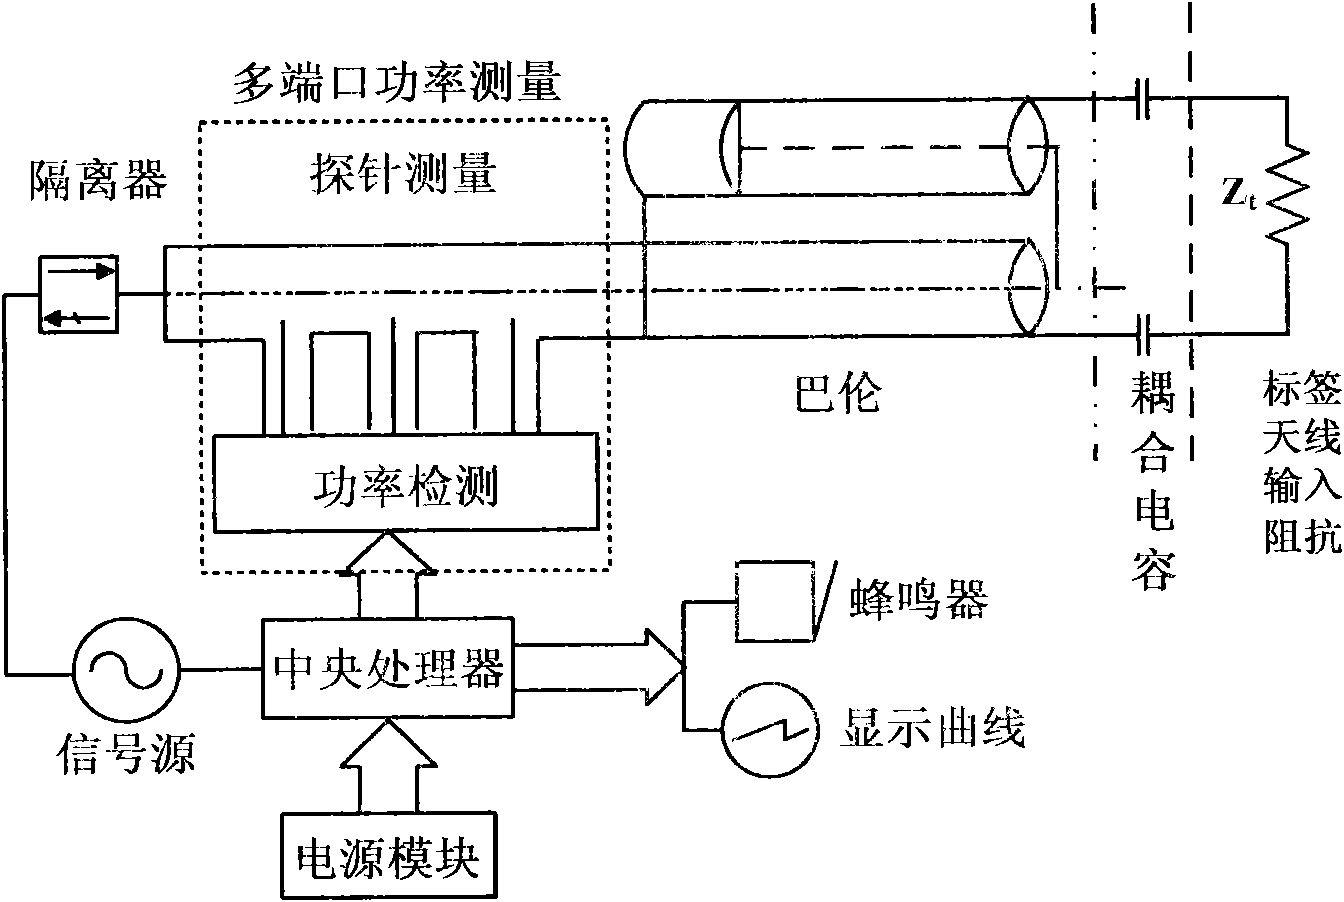 Online testing method for mass production of ultrahigh frequency (UHF) identification electronic tag antenna